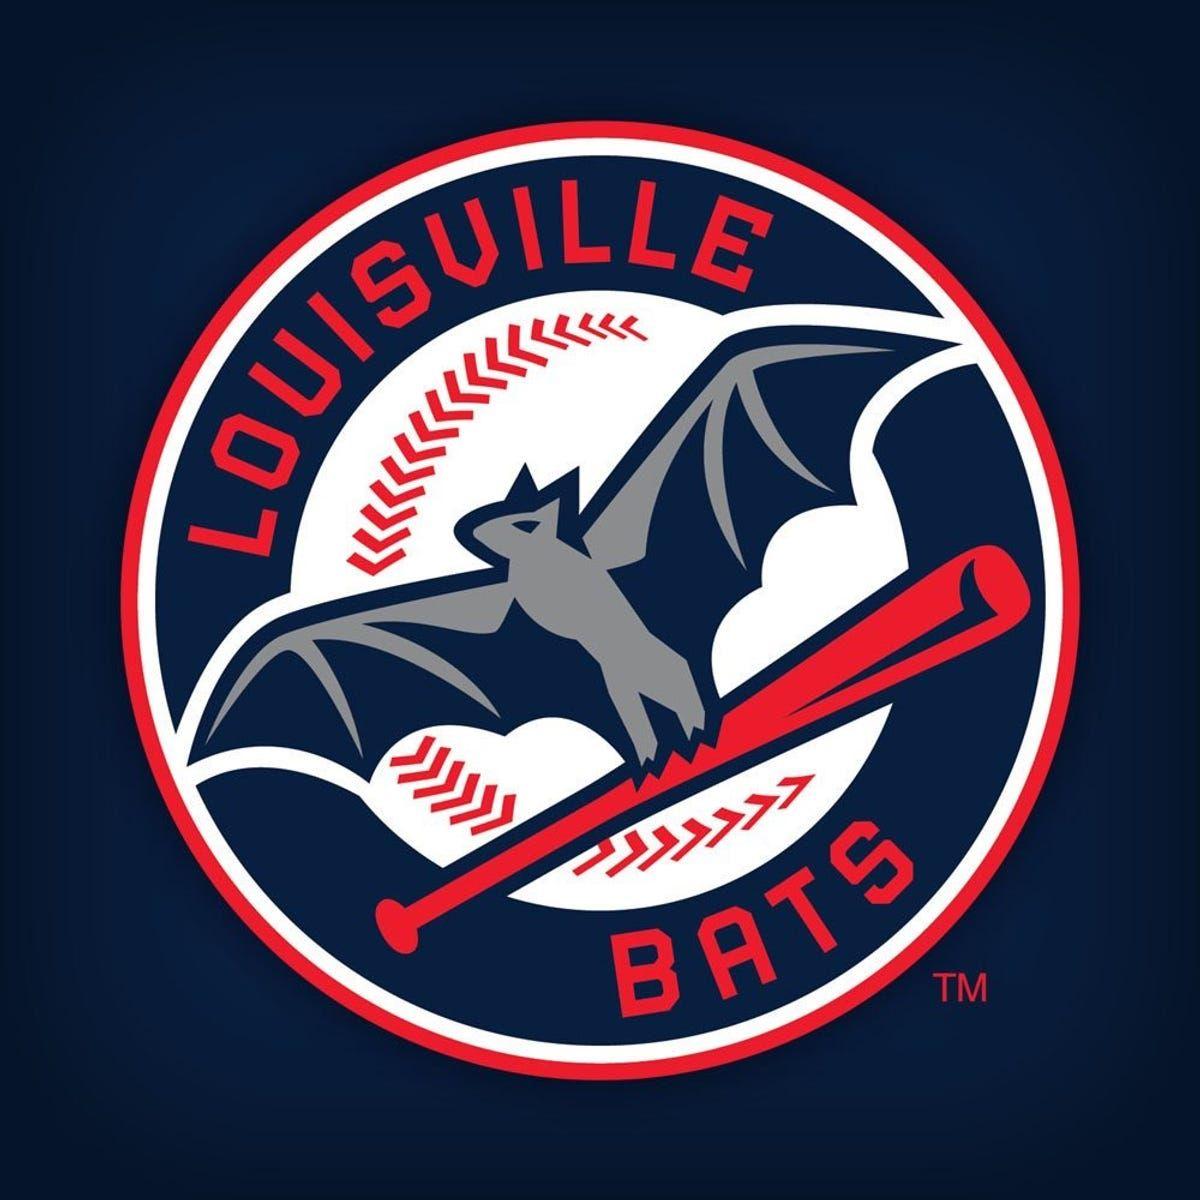 Bats Logo - Louisville Bats return to roots with new logo, old color for Reds ...